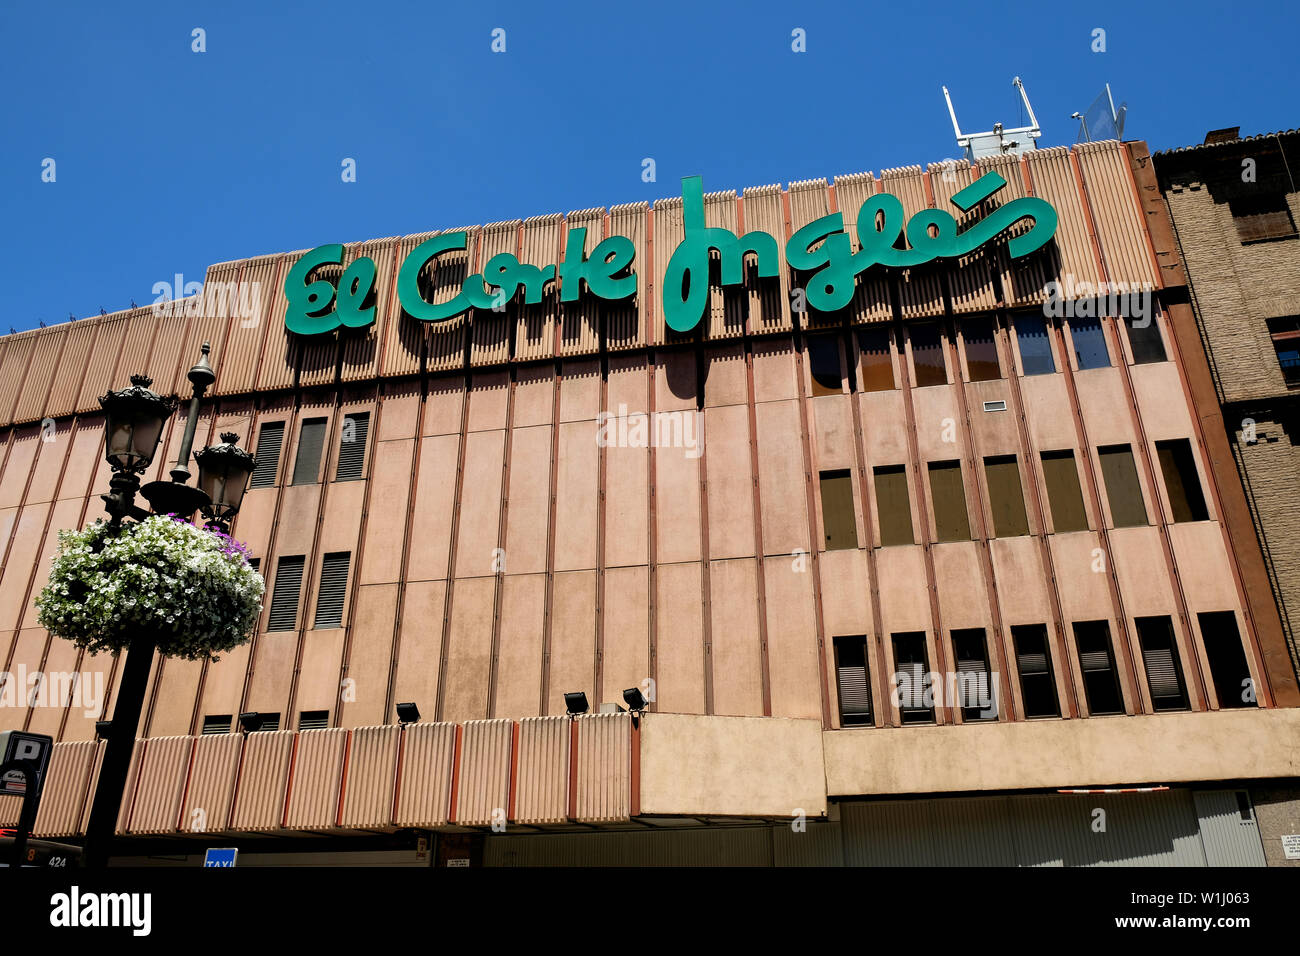 Exterior view of storefront and sign at El Corte Ingles department store in Granada, Spain; largest department store chain in Europe. Stock Photo